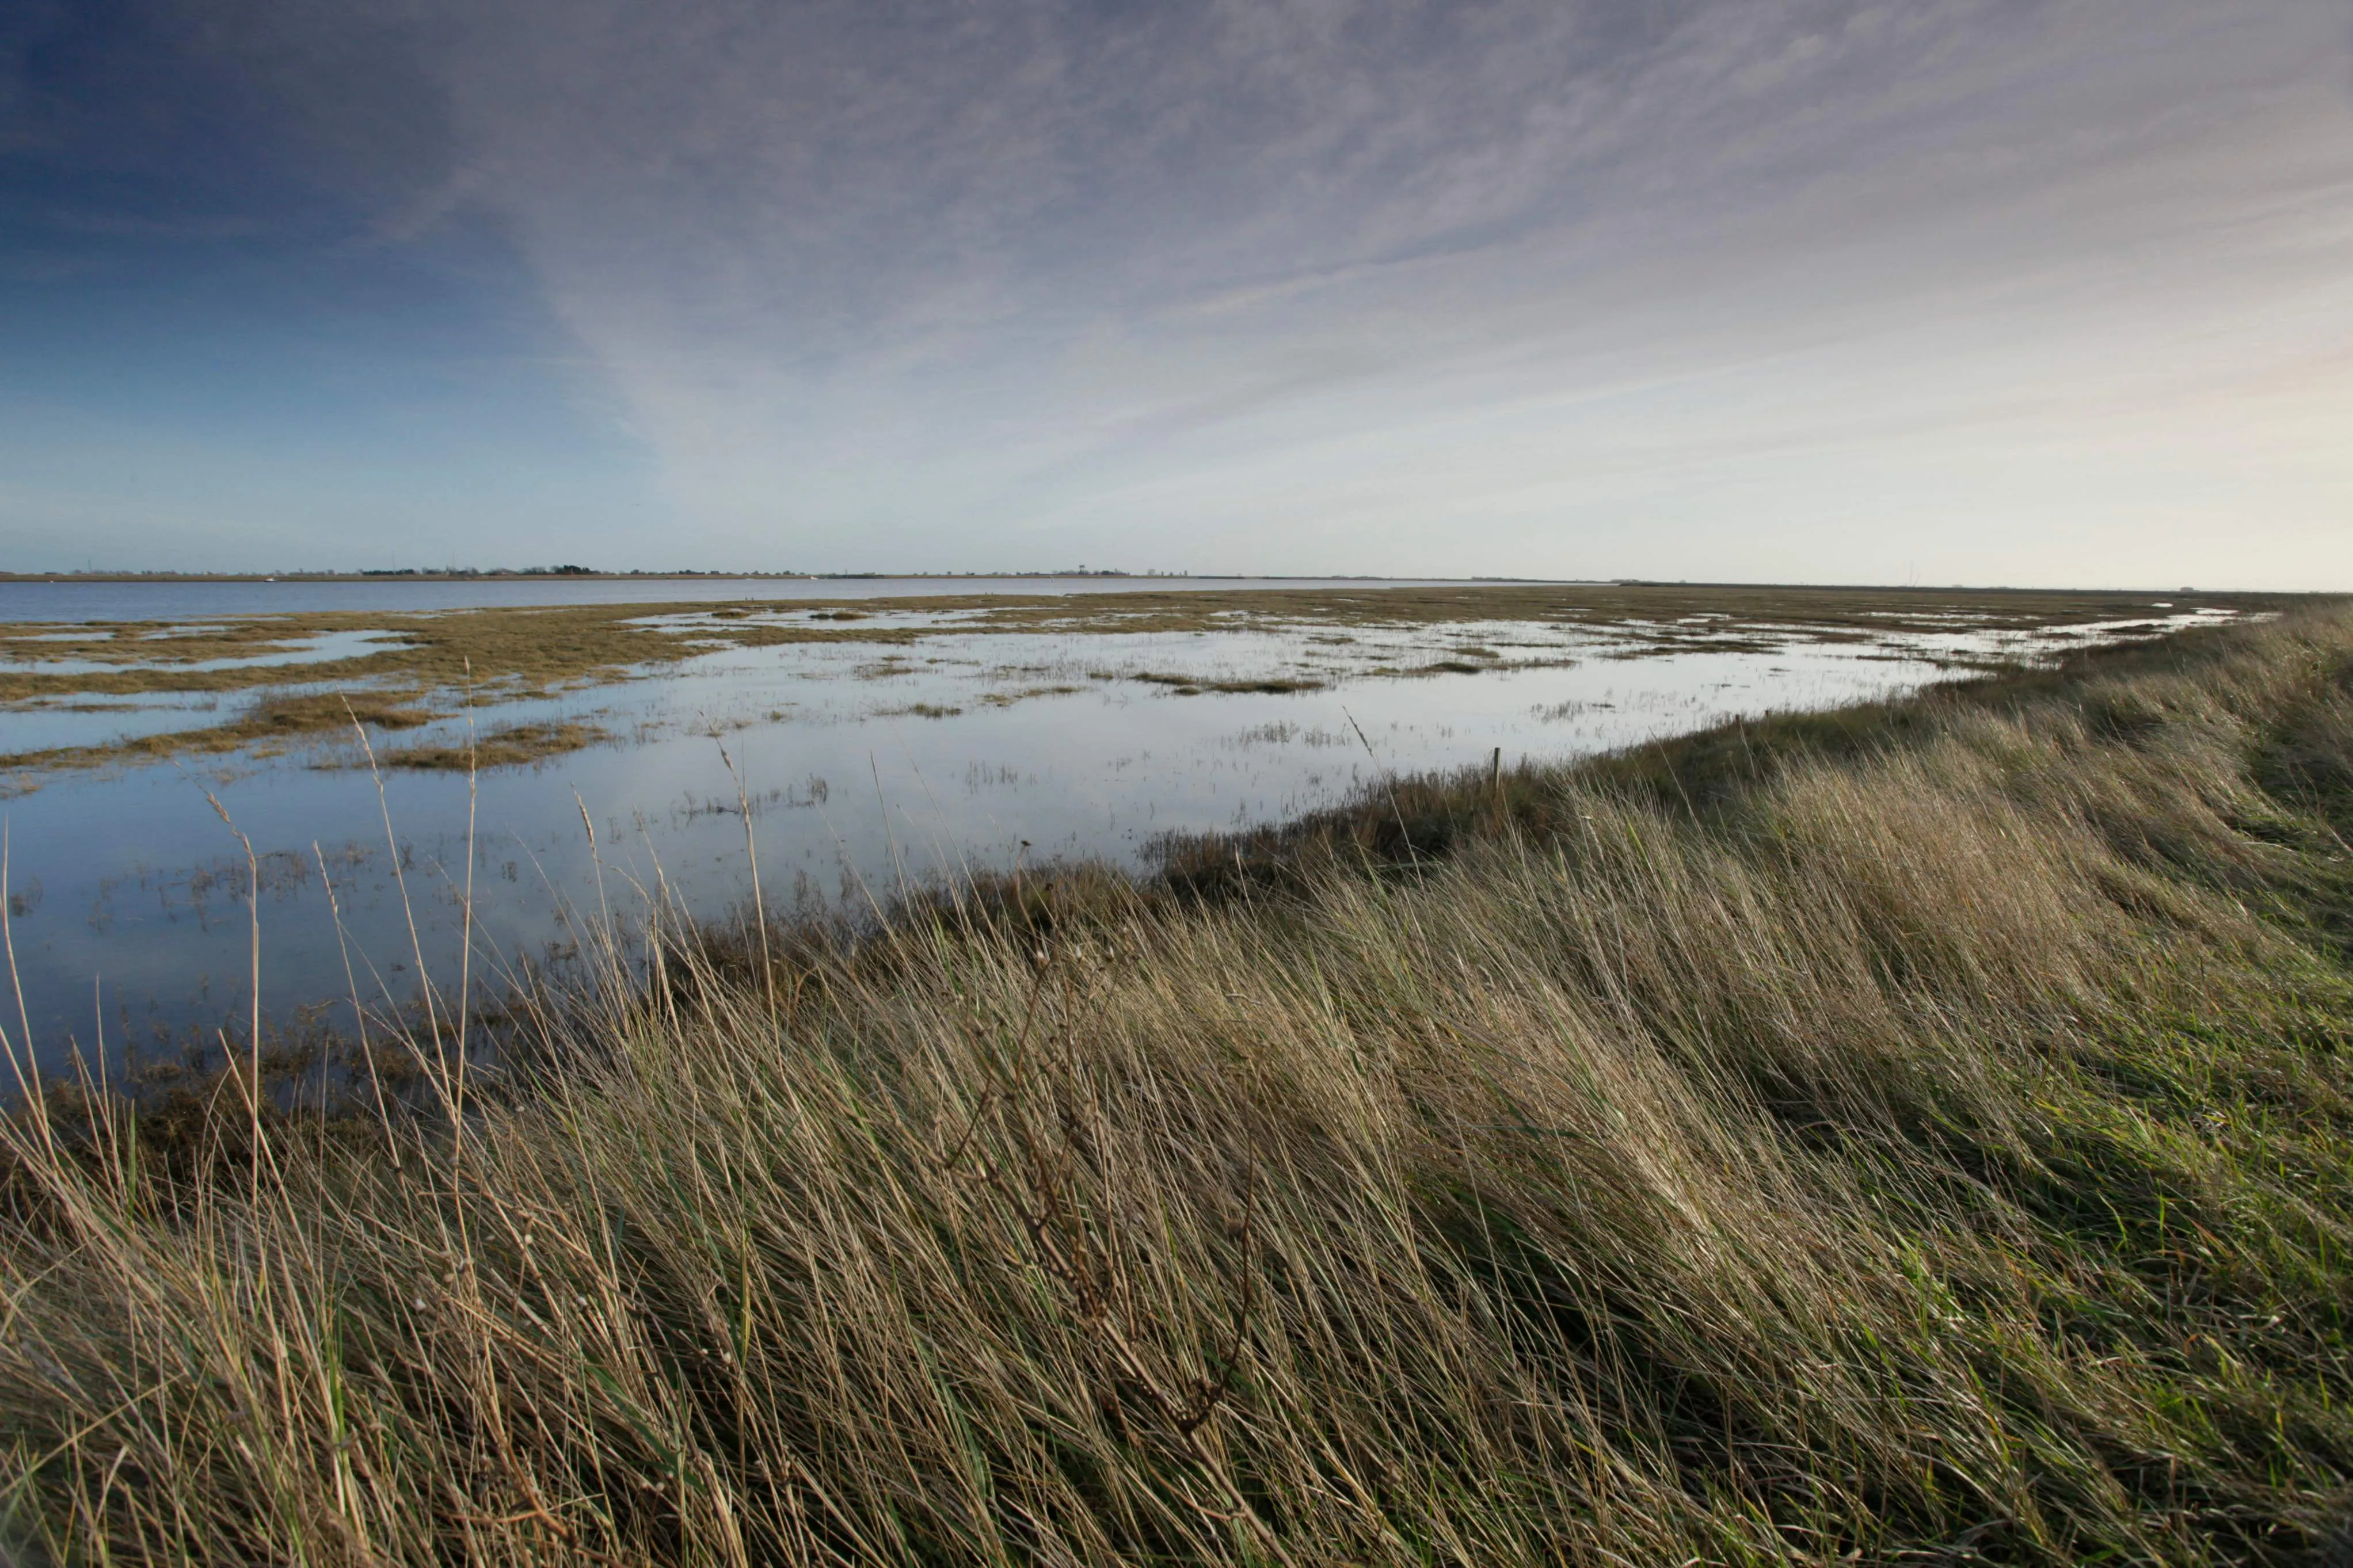 Landscape image of Wallasea Island with grass in the foreground and flooded marshes in the distance.